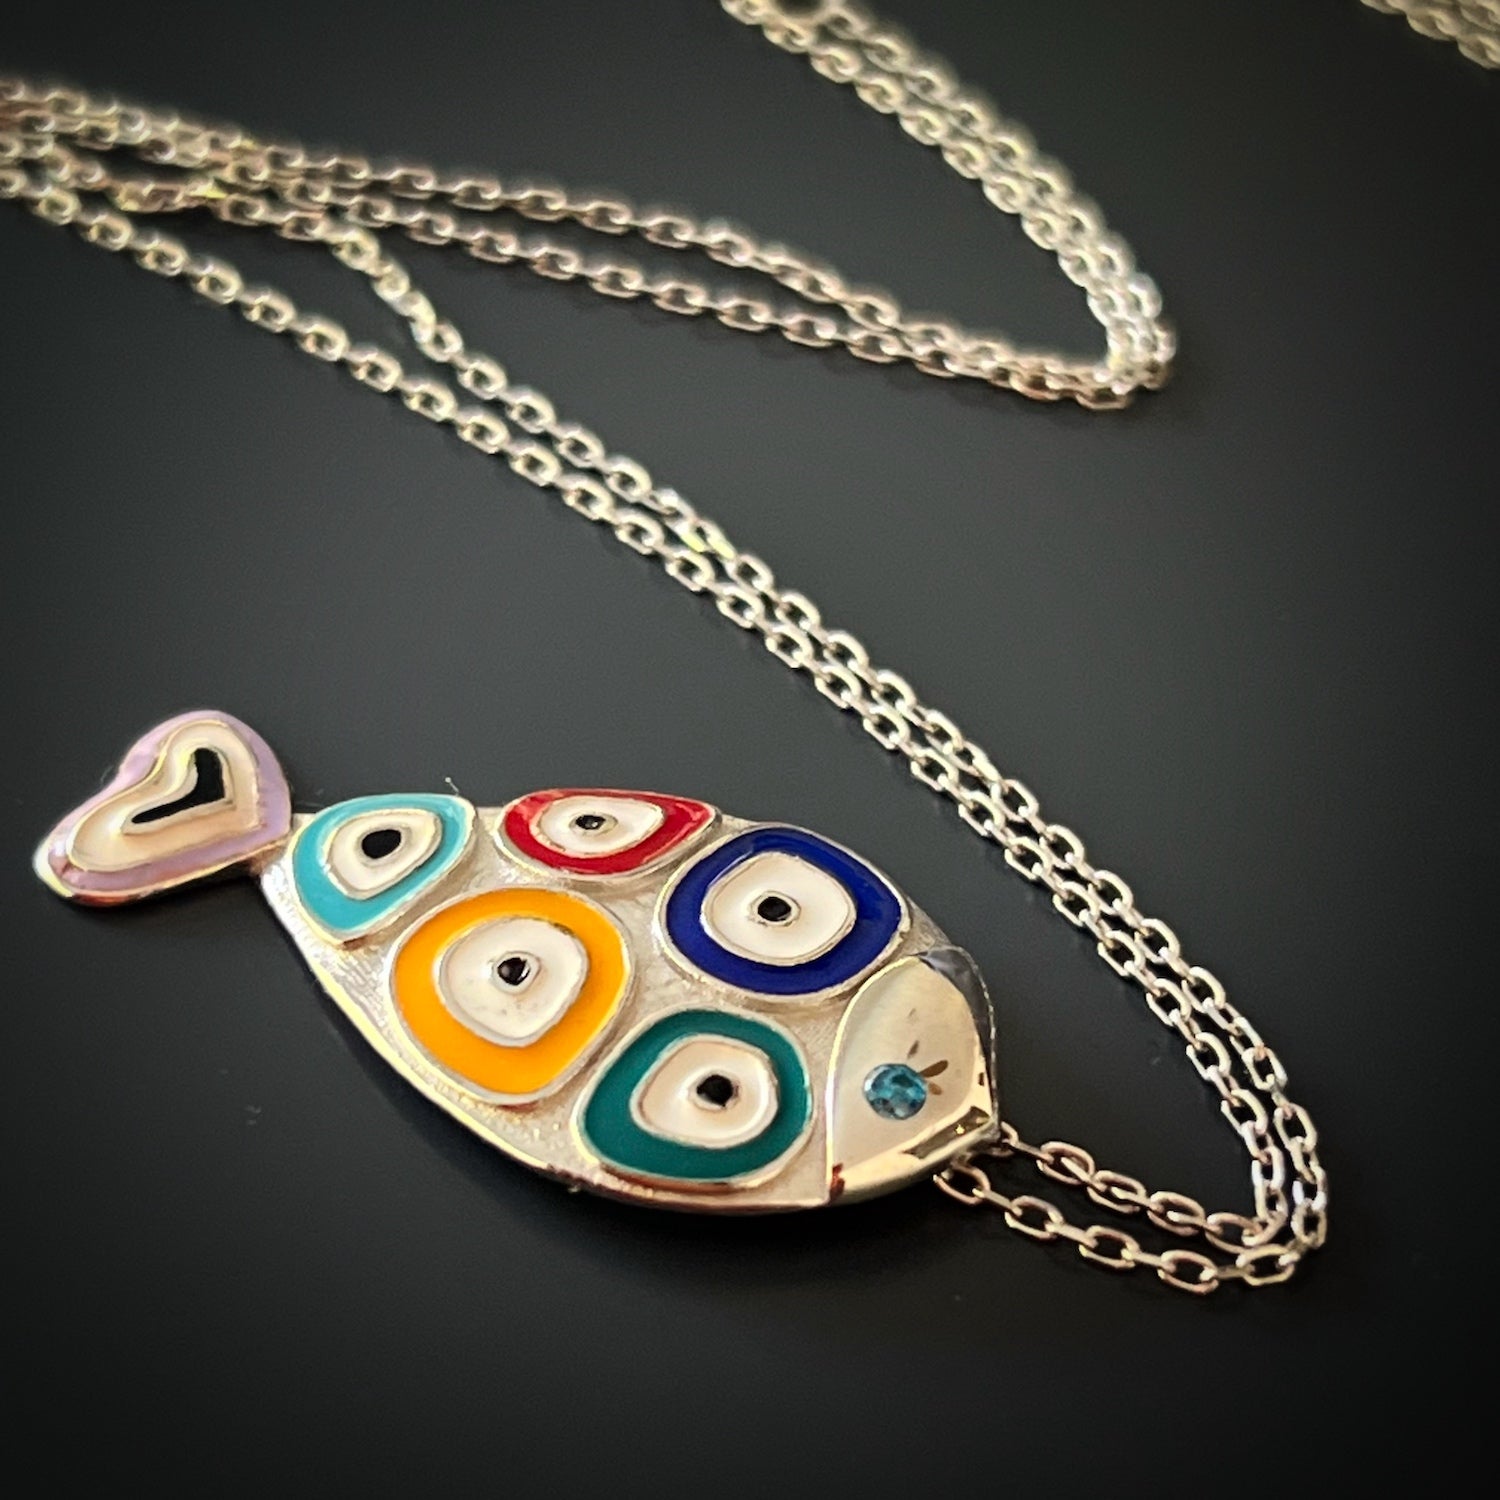 The captivating Silver Evil Eye Fish Necklace, designed to attract positive energy and add a touch of charm to your everyday look.